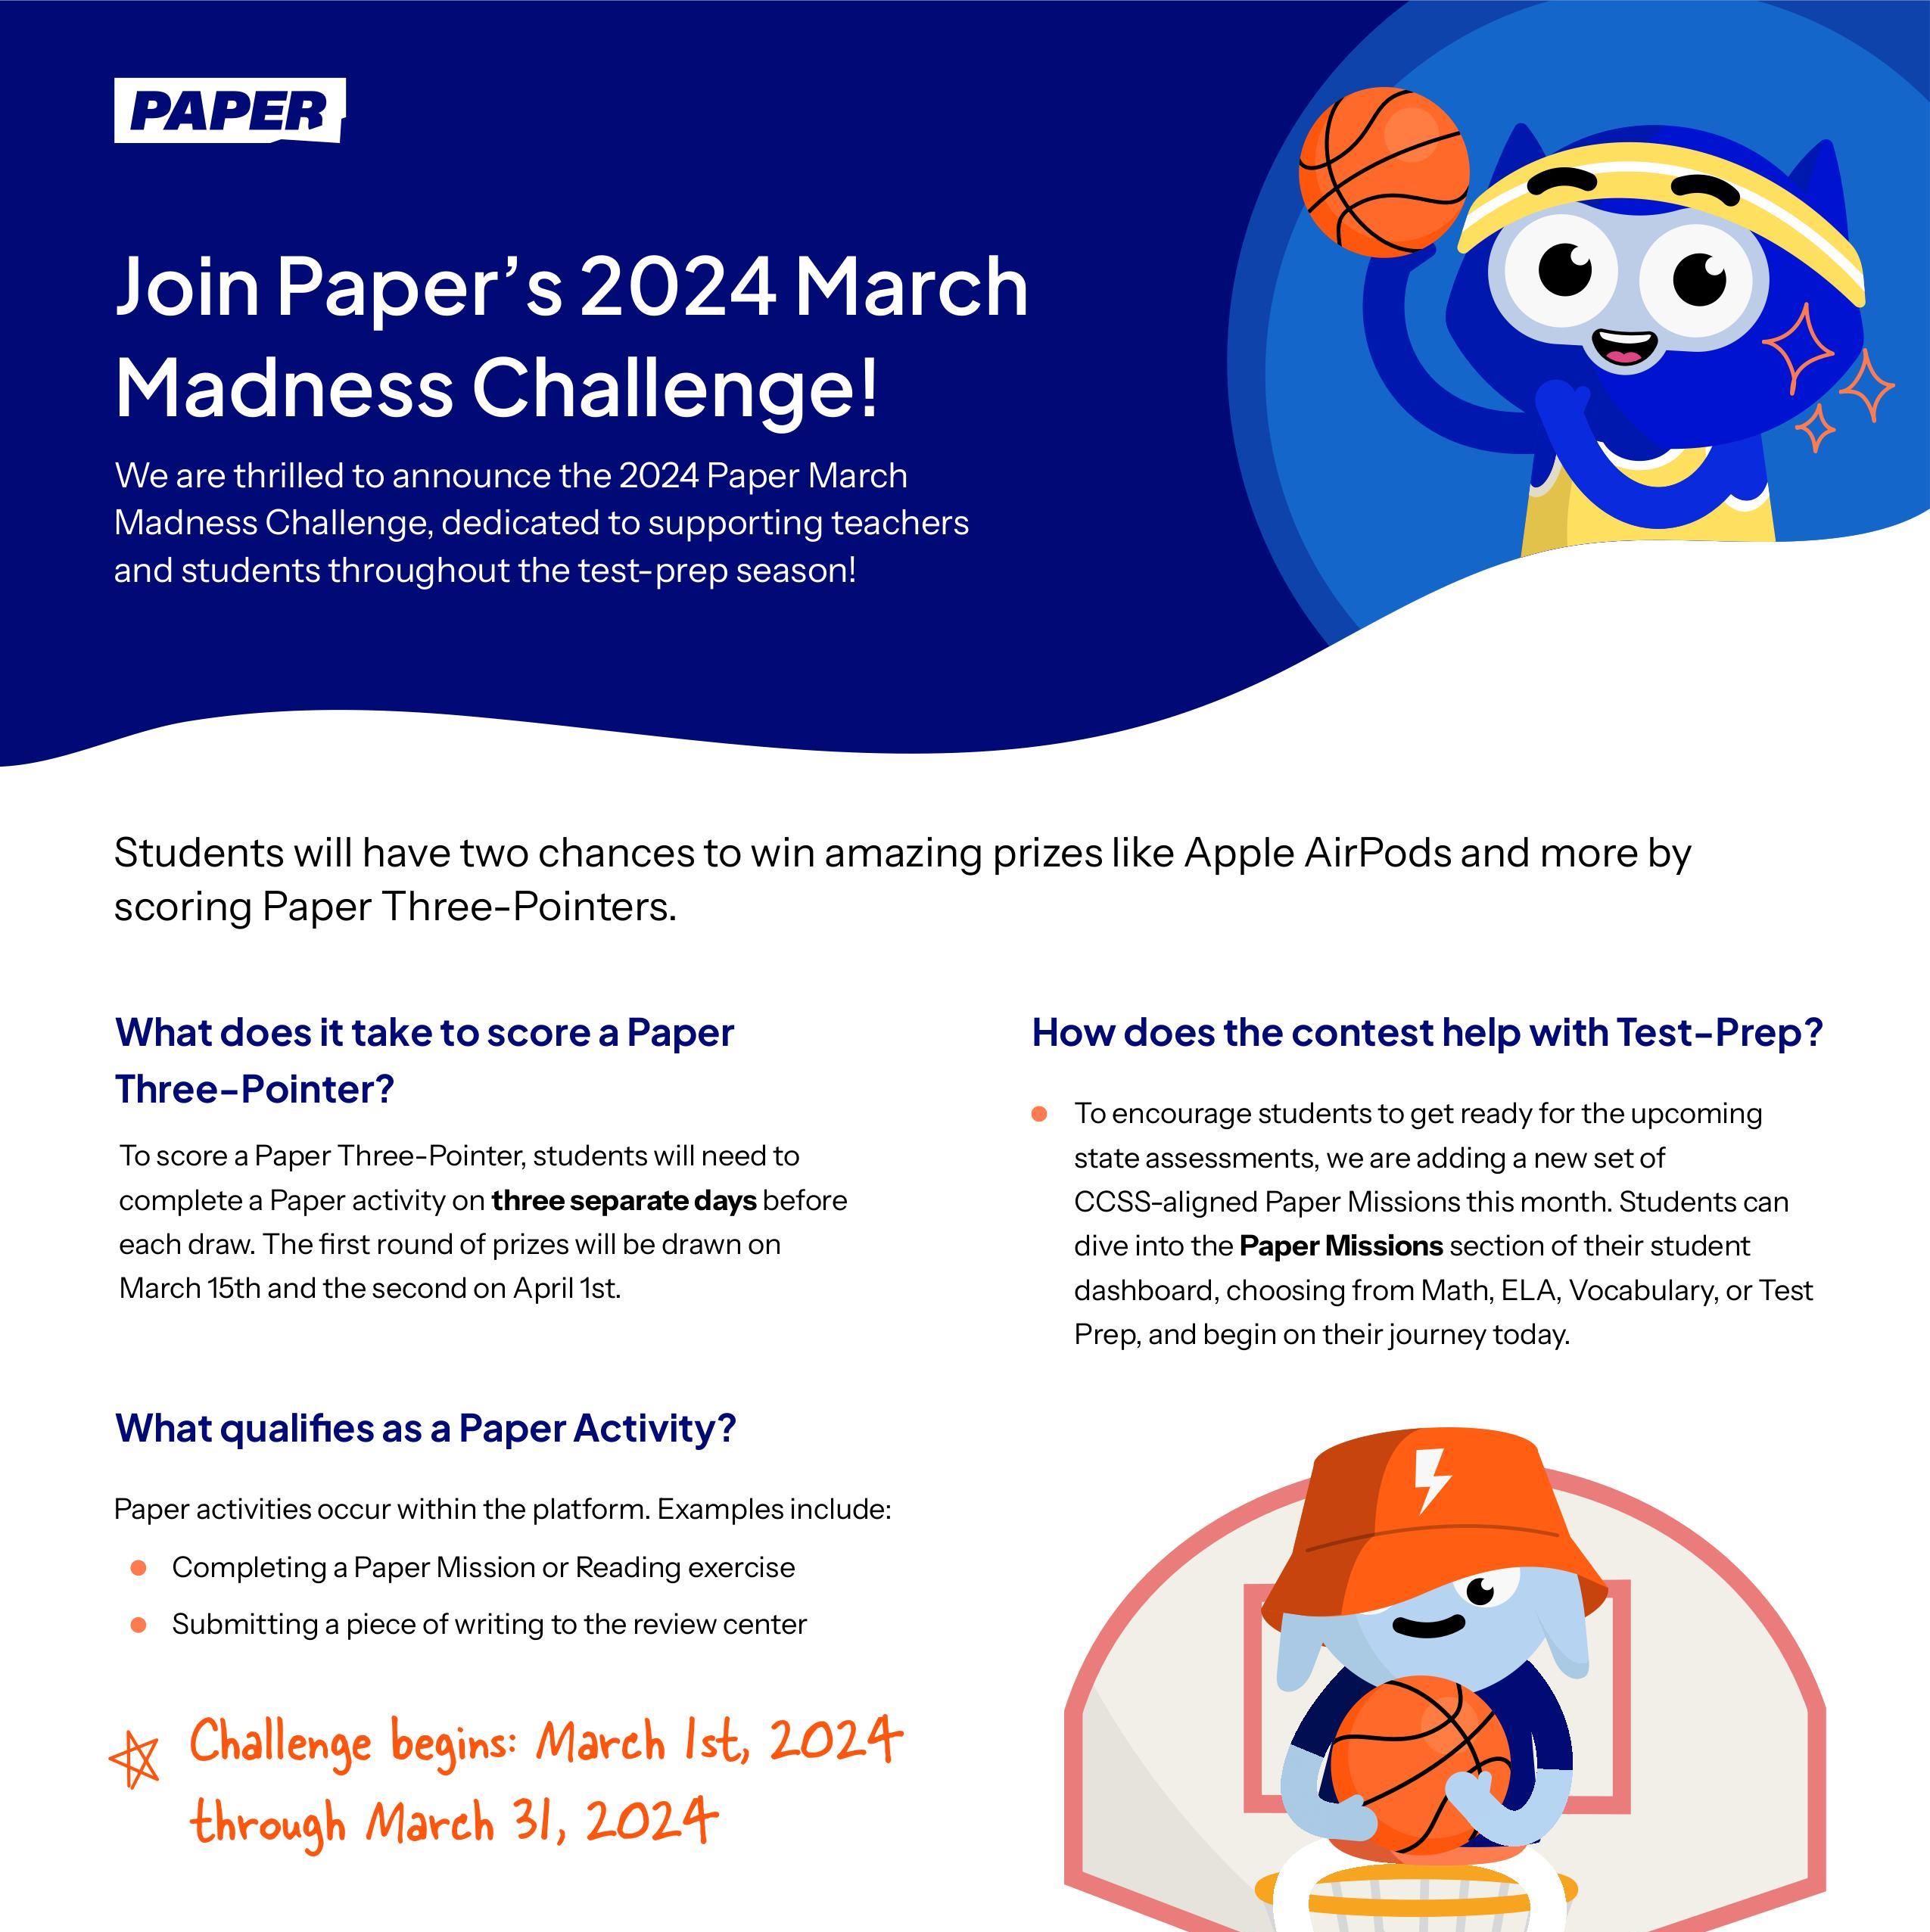 Join Paper’s 2024 March Madness Challenge!  We are thrilled to announce the 2024 Paper March Madness Challenge, dedicated to supporting teachers and students throughout the test-prep season!  Students will have two chances to win amazing prizes like Apple AirPods and more by scoring Paper Three-Pointers.   Challenge begins: March 1st, 2024 through March 31, 2024